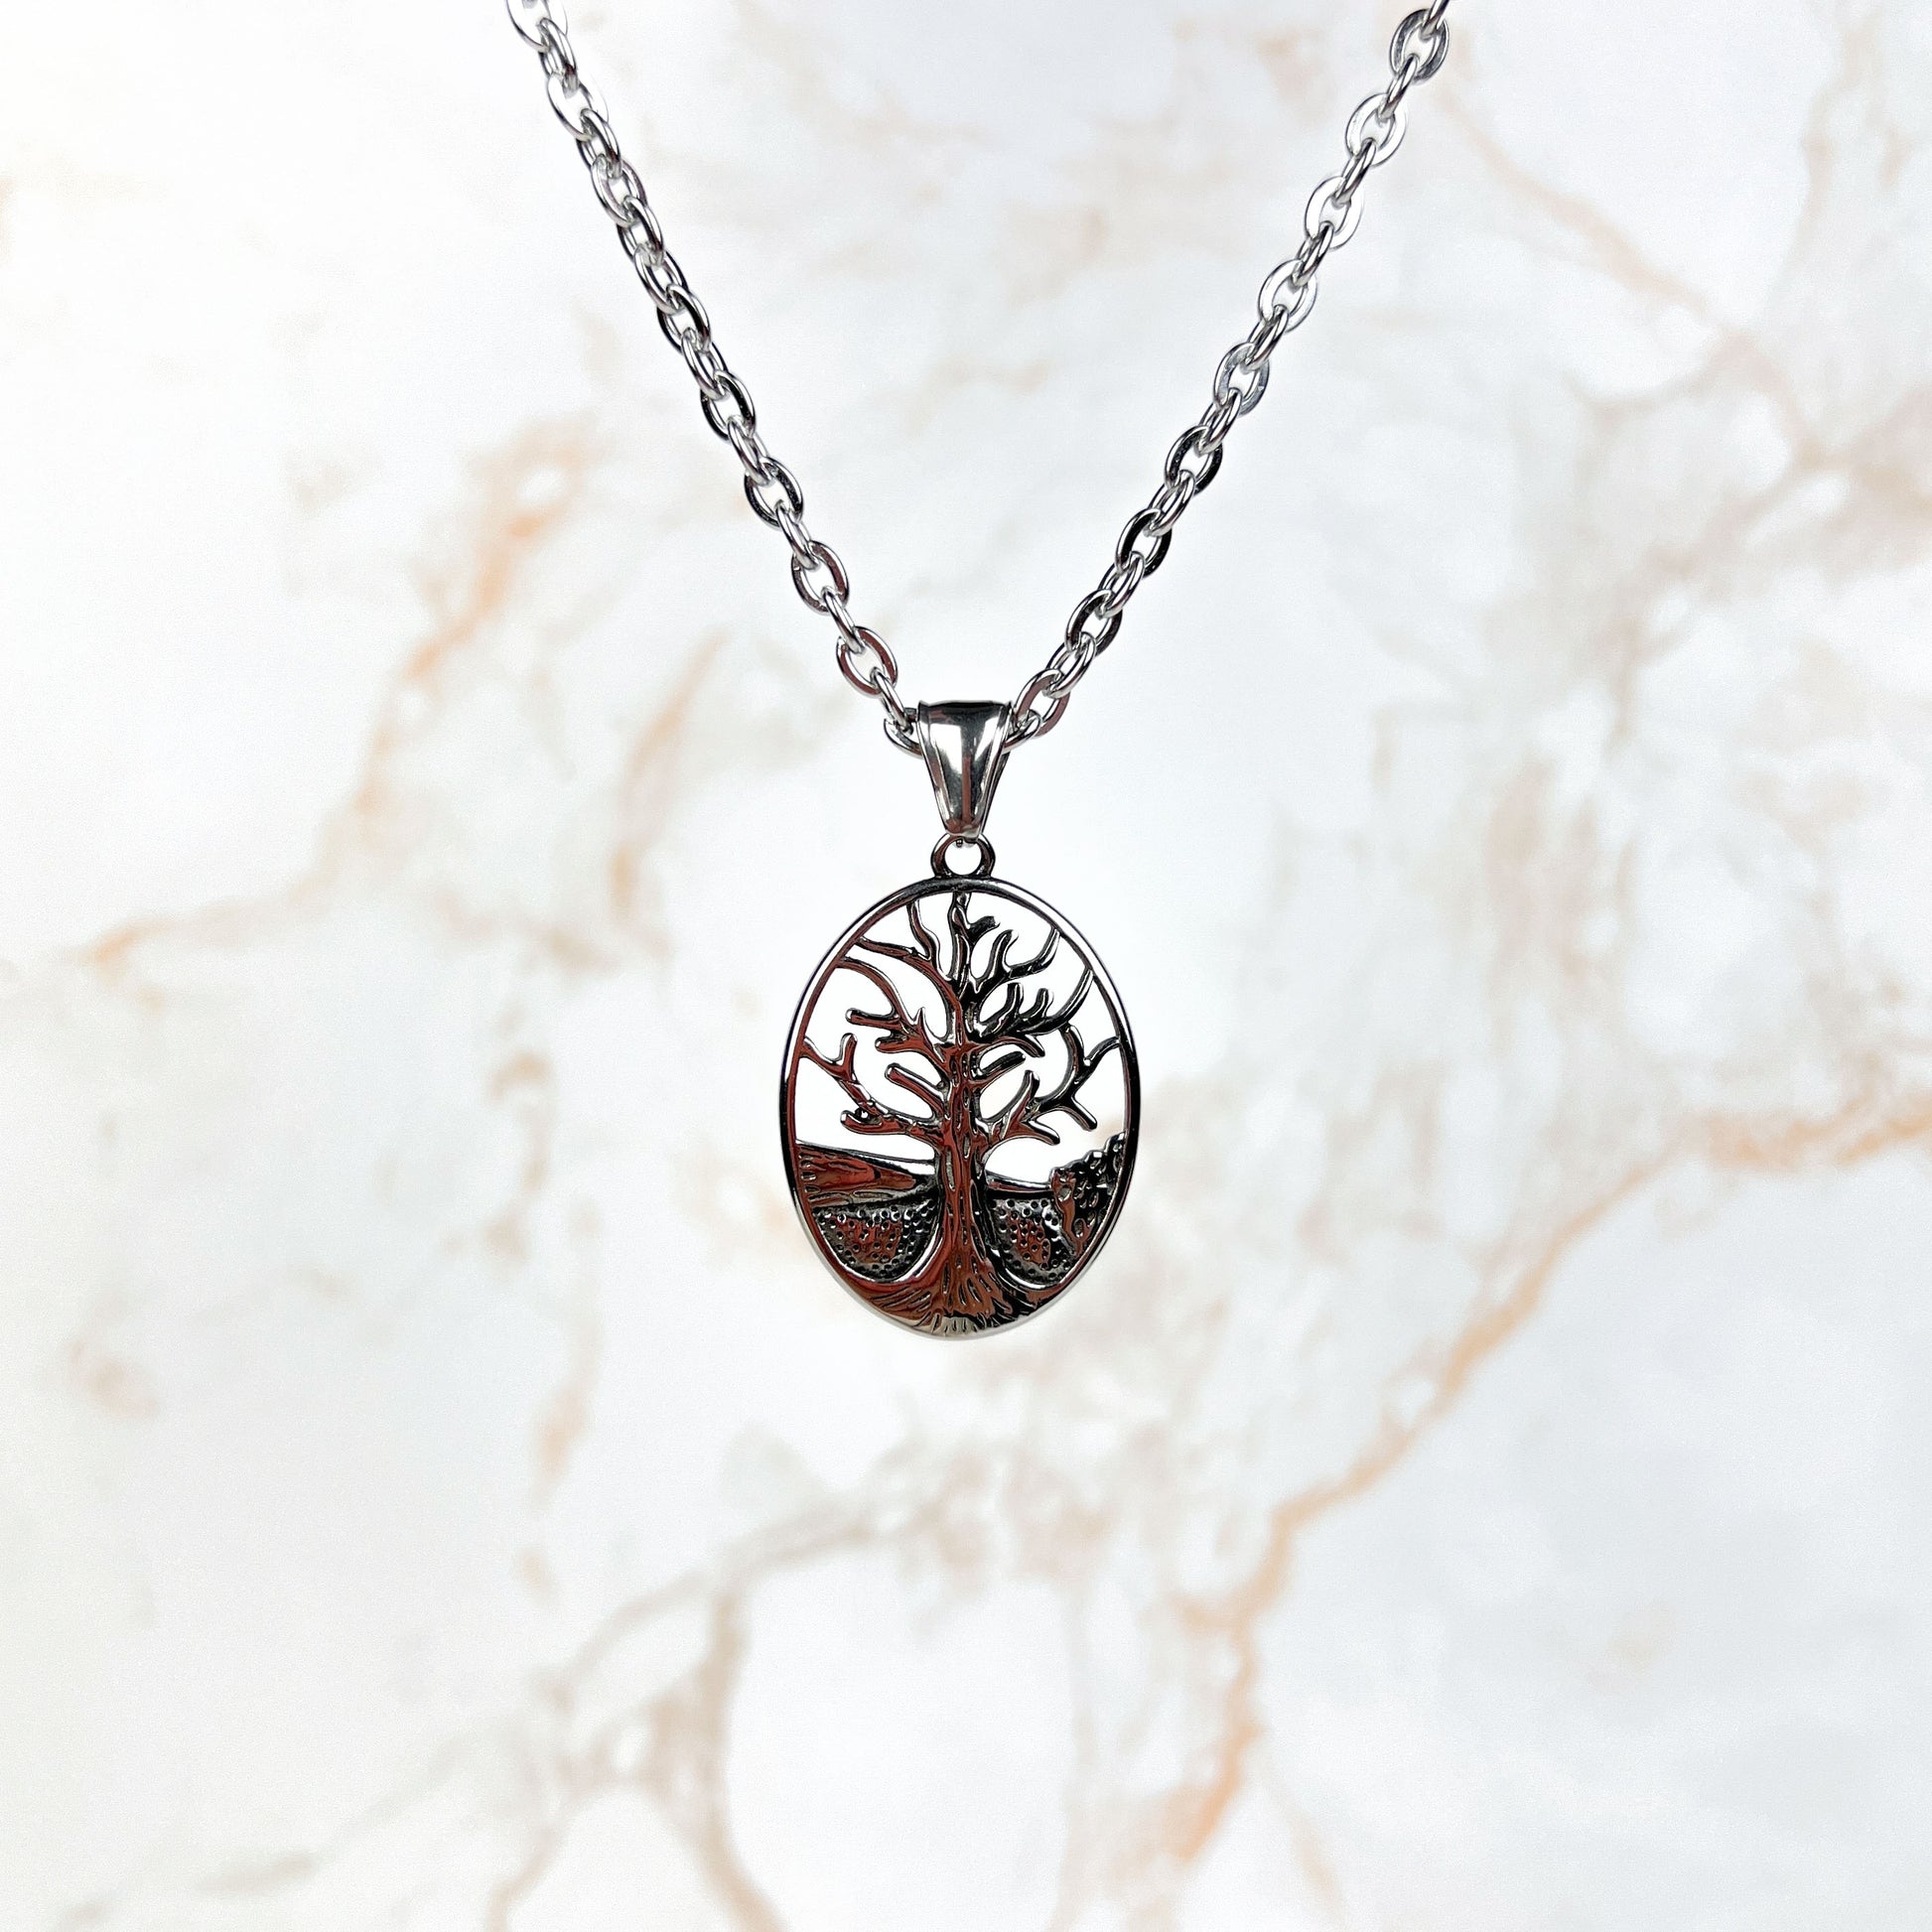 Winter tree gothic pendant necklace, stainless steel Baguette Magick